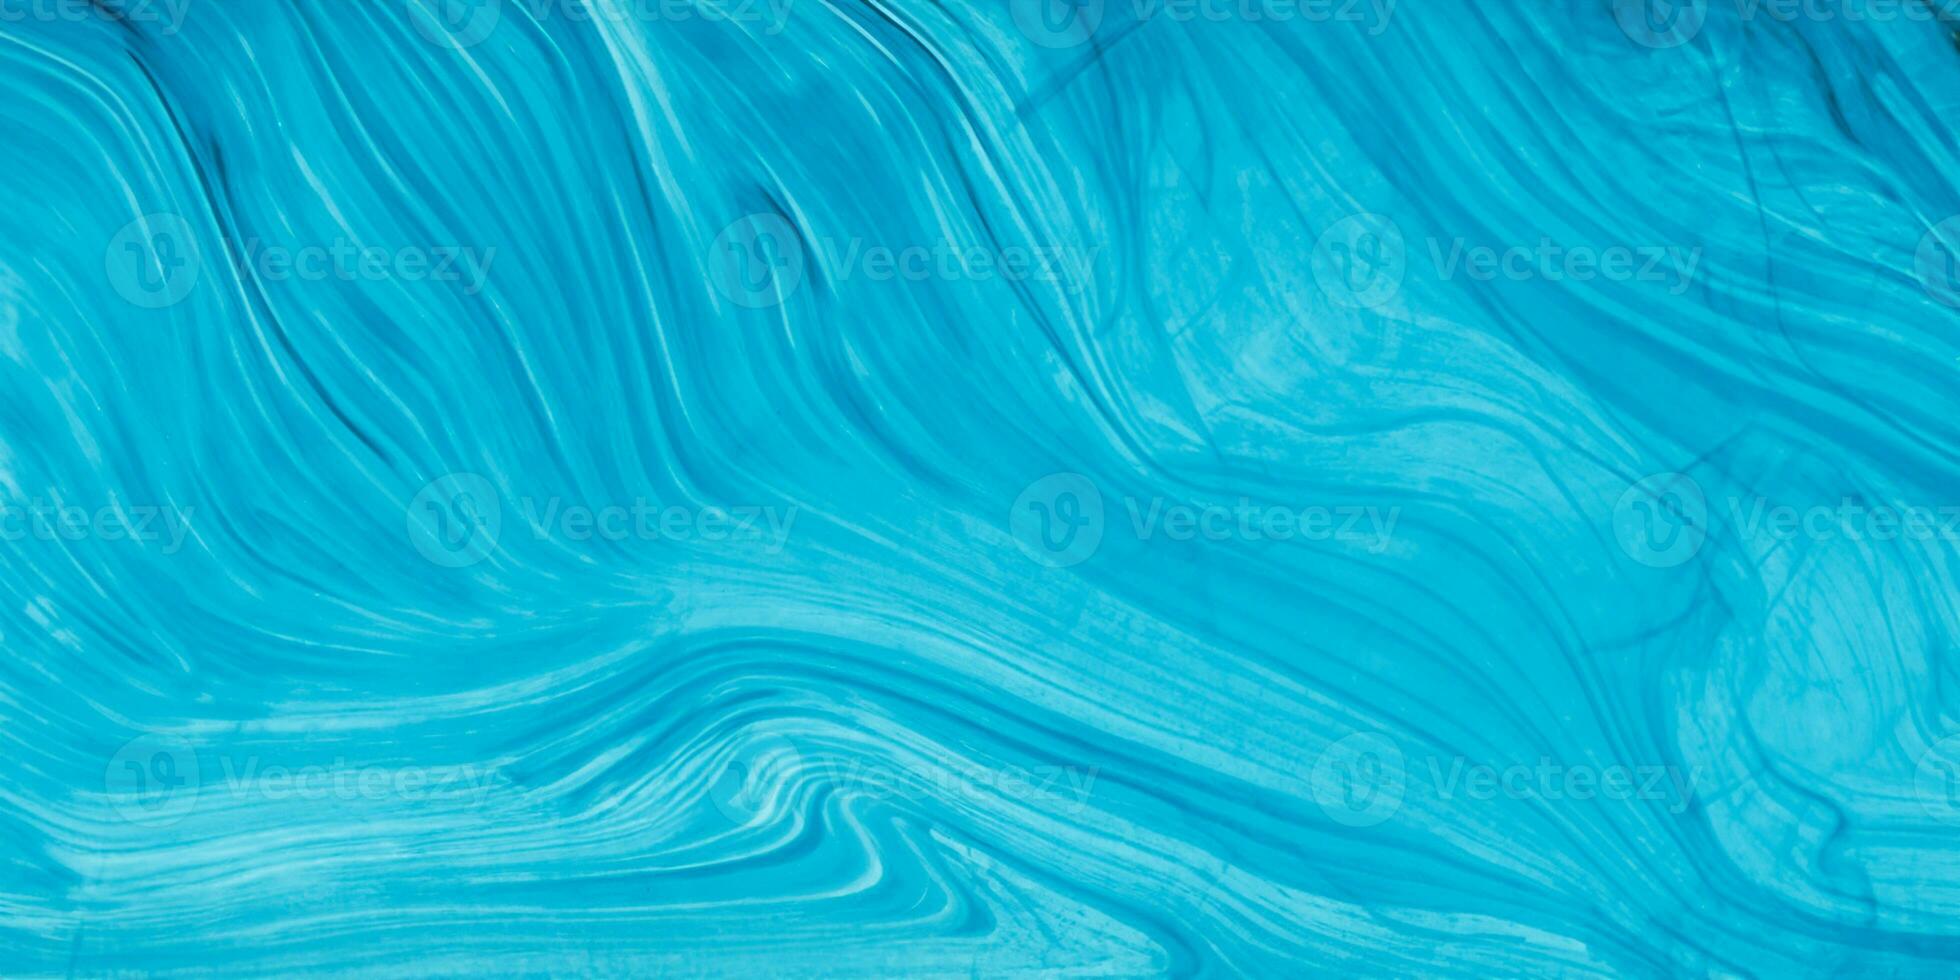 blue abstract background with wavy lines photo